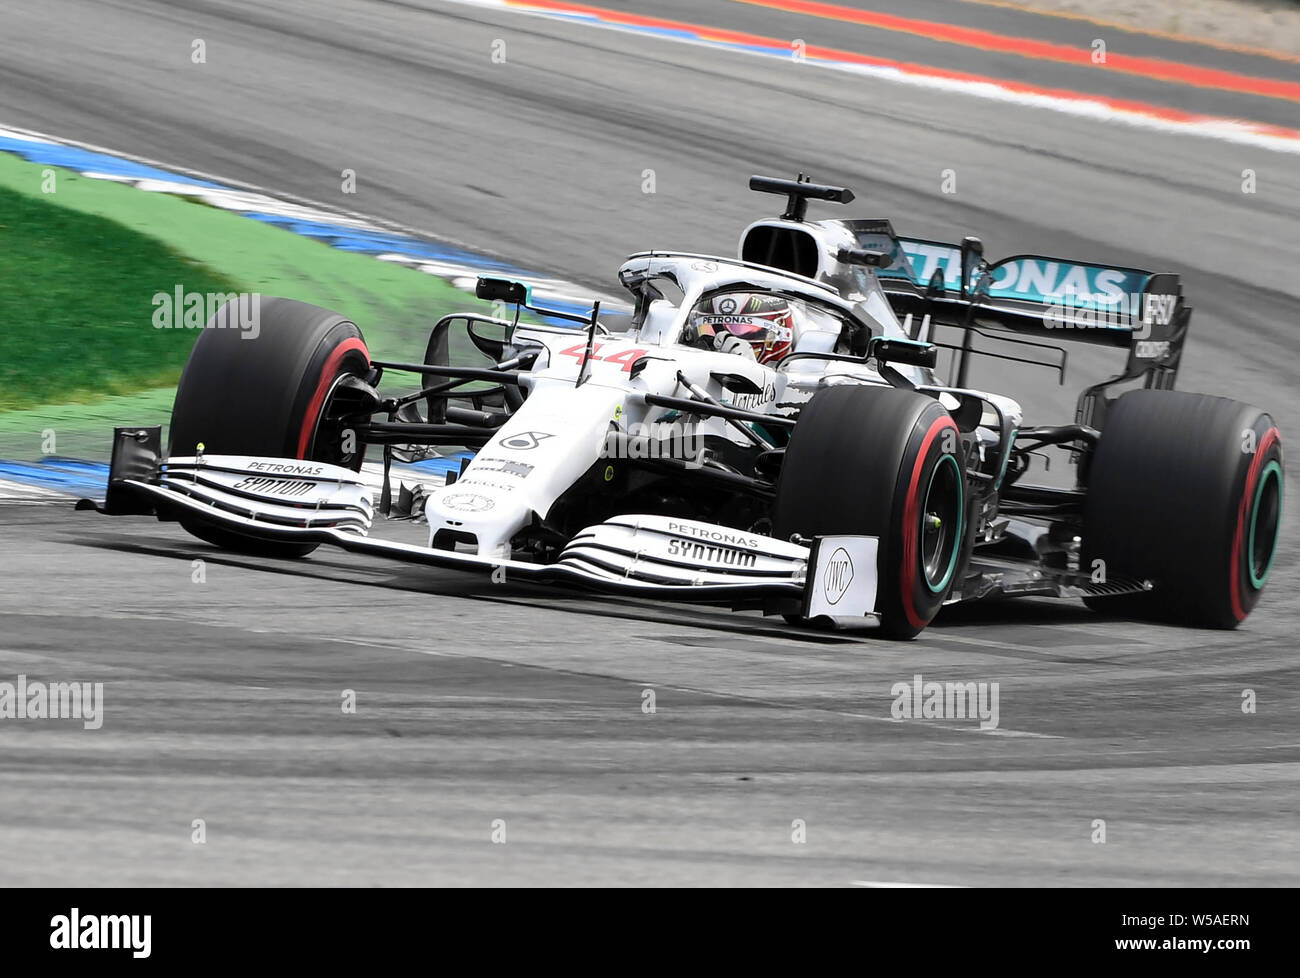 Hockenheim, Germany. 27th July, 2019. Motorsport: Formula 1 World Championship, Grand Prix of Germany. Lewis Hamilton from Great Britain of the Mercedes-AMG Petronas team drives on the race track during the third free practice session. Credit: Uli Deck/dpa/Alamy Live News Stock Photo